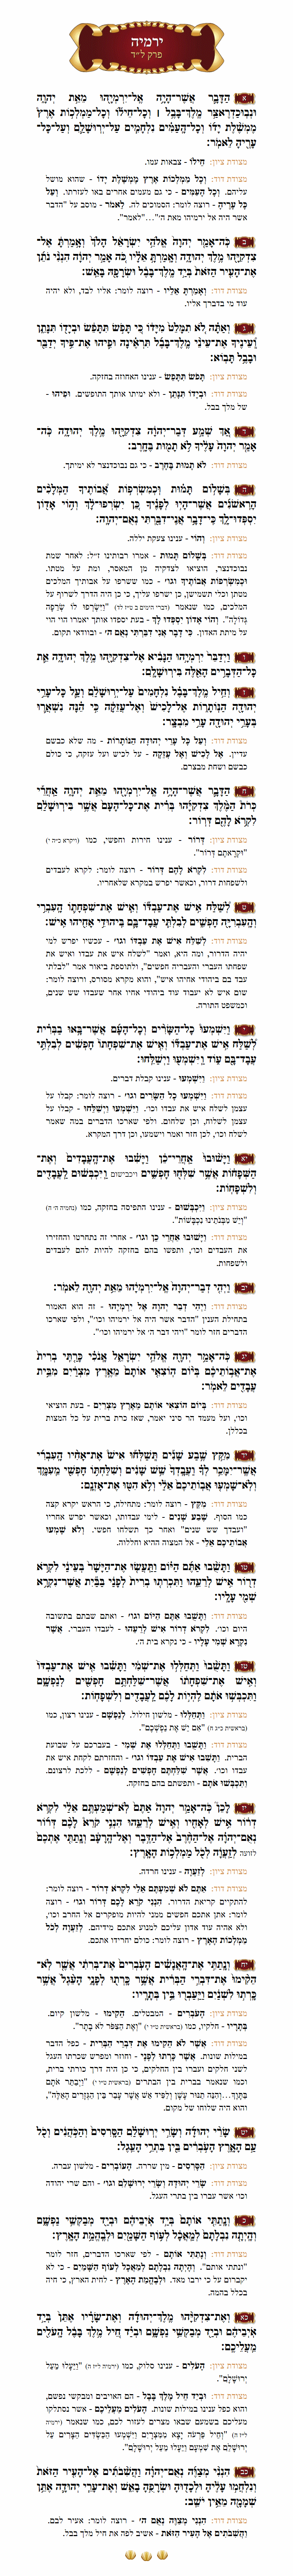 Sefer Yirmeyohu Chapter 34 with commentary